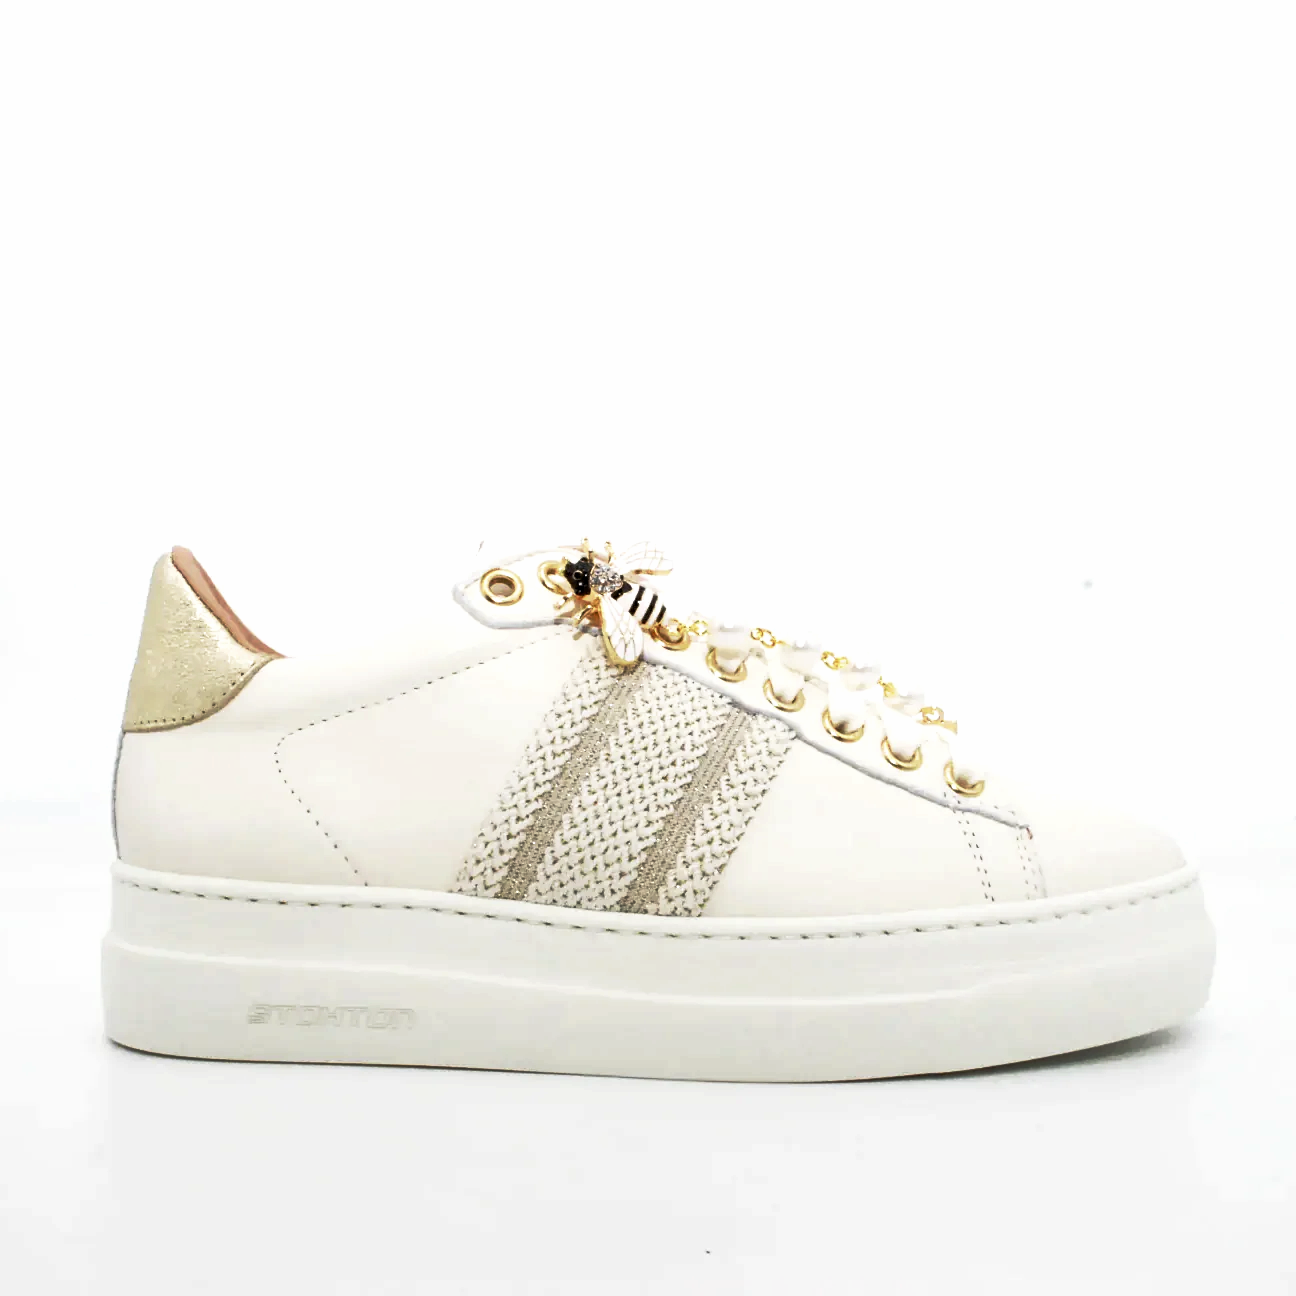 snakers-stokton-in-pelle-35-crema-pelle-sneakers.png